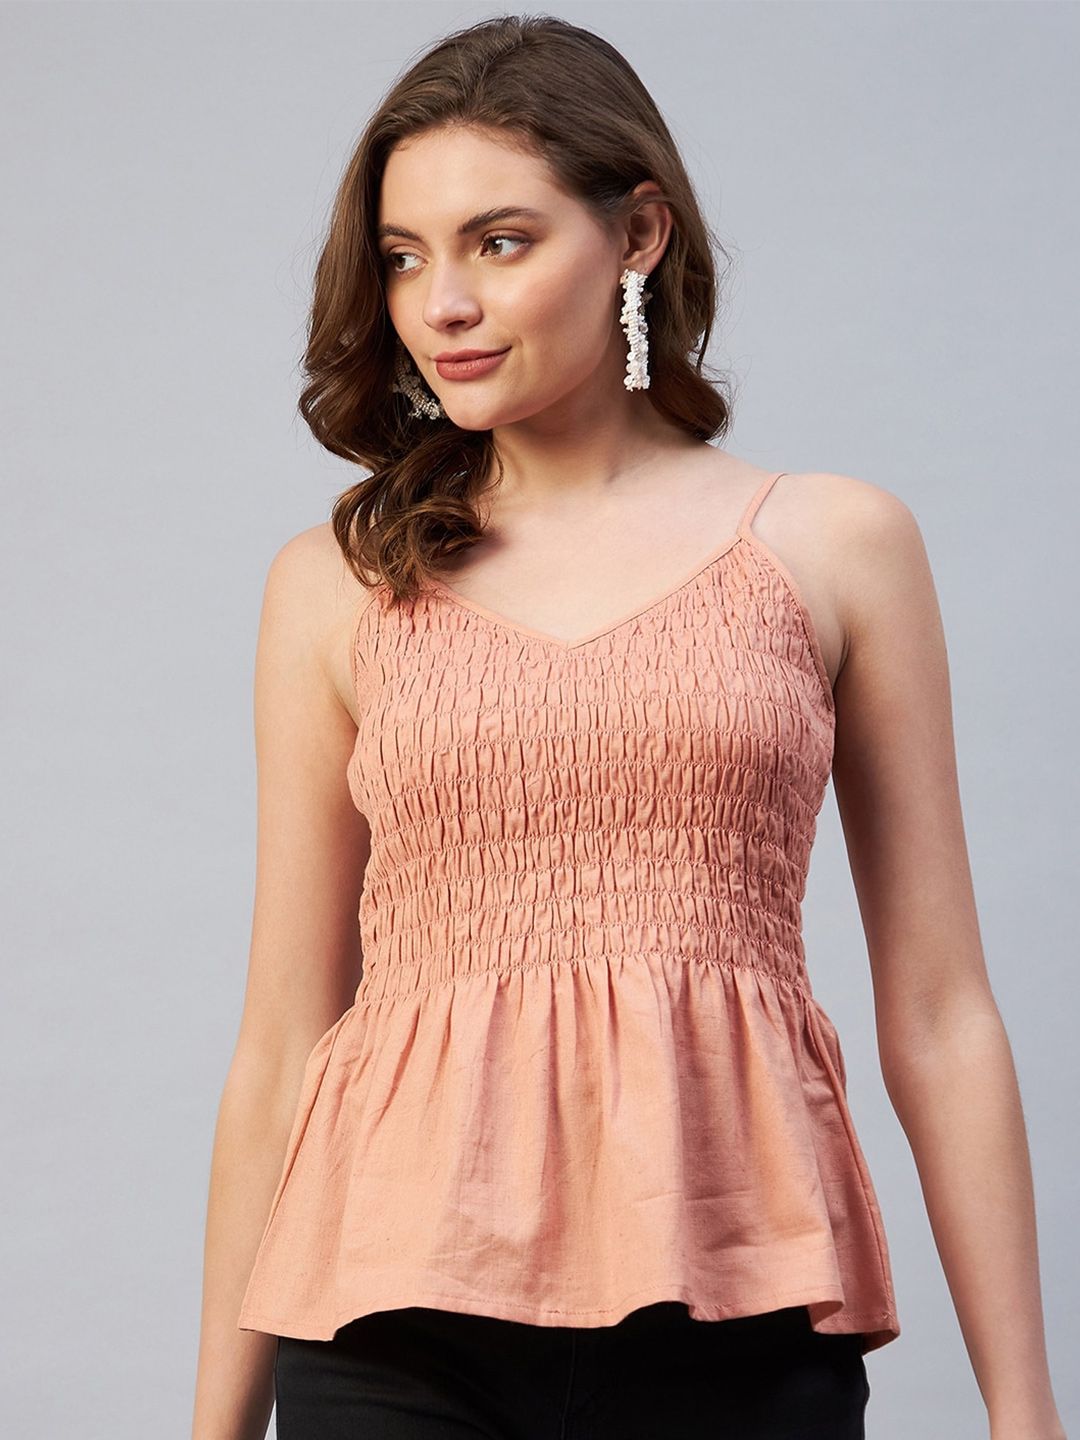 Marie Claire Women Peach-Colored Smocked Peplum Top Price in India